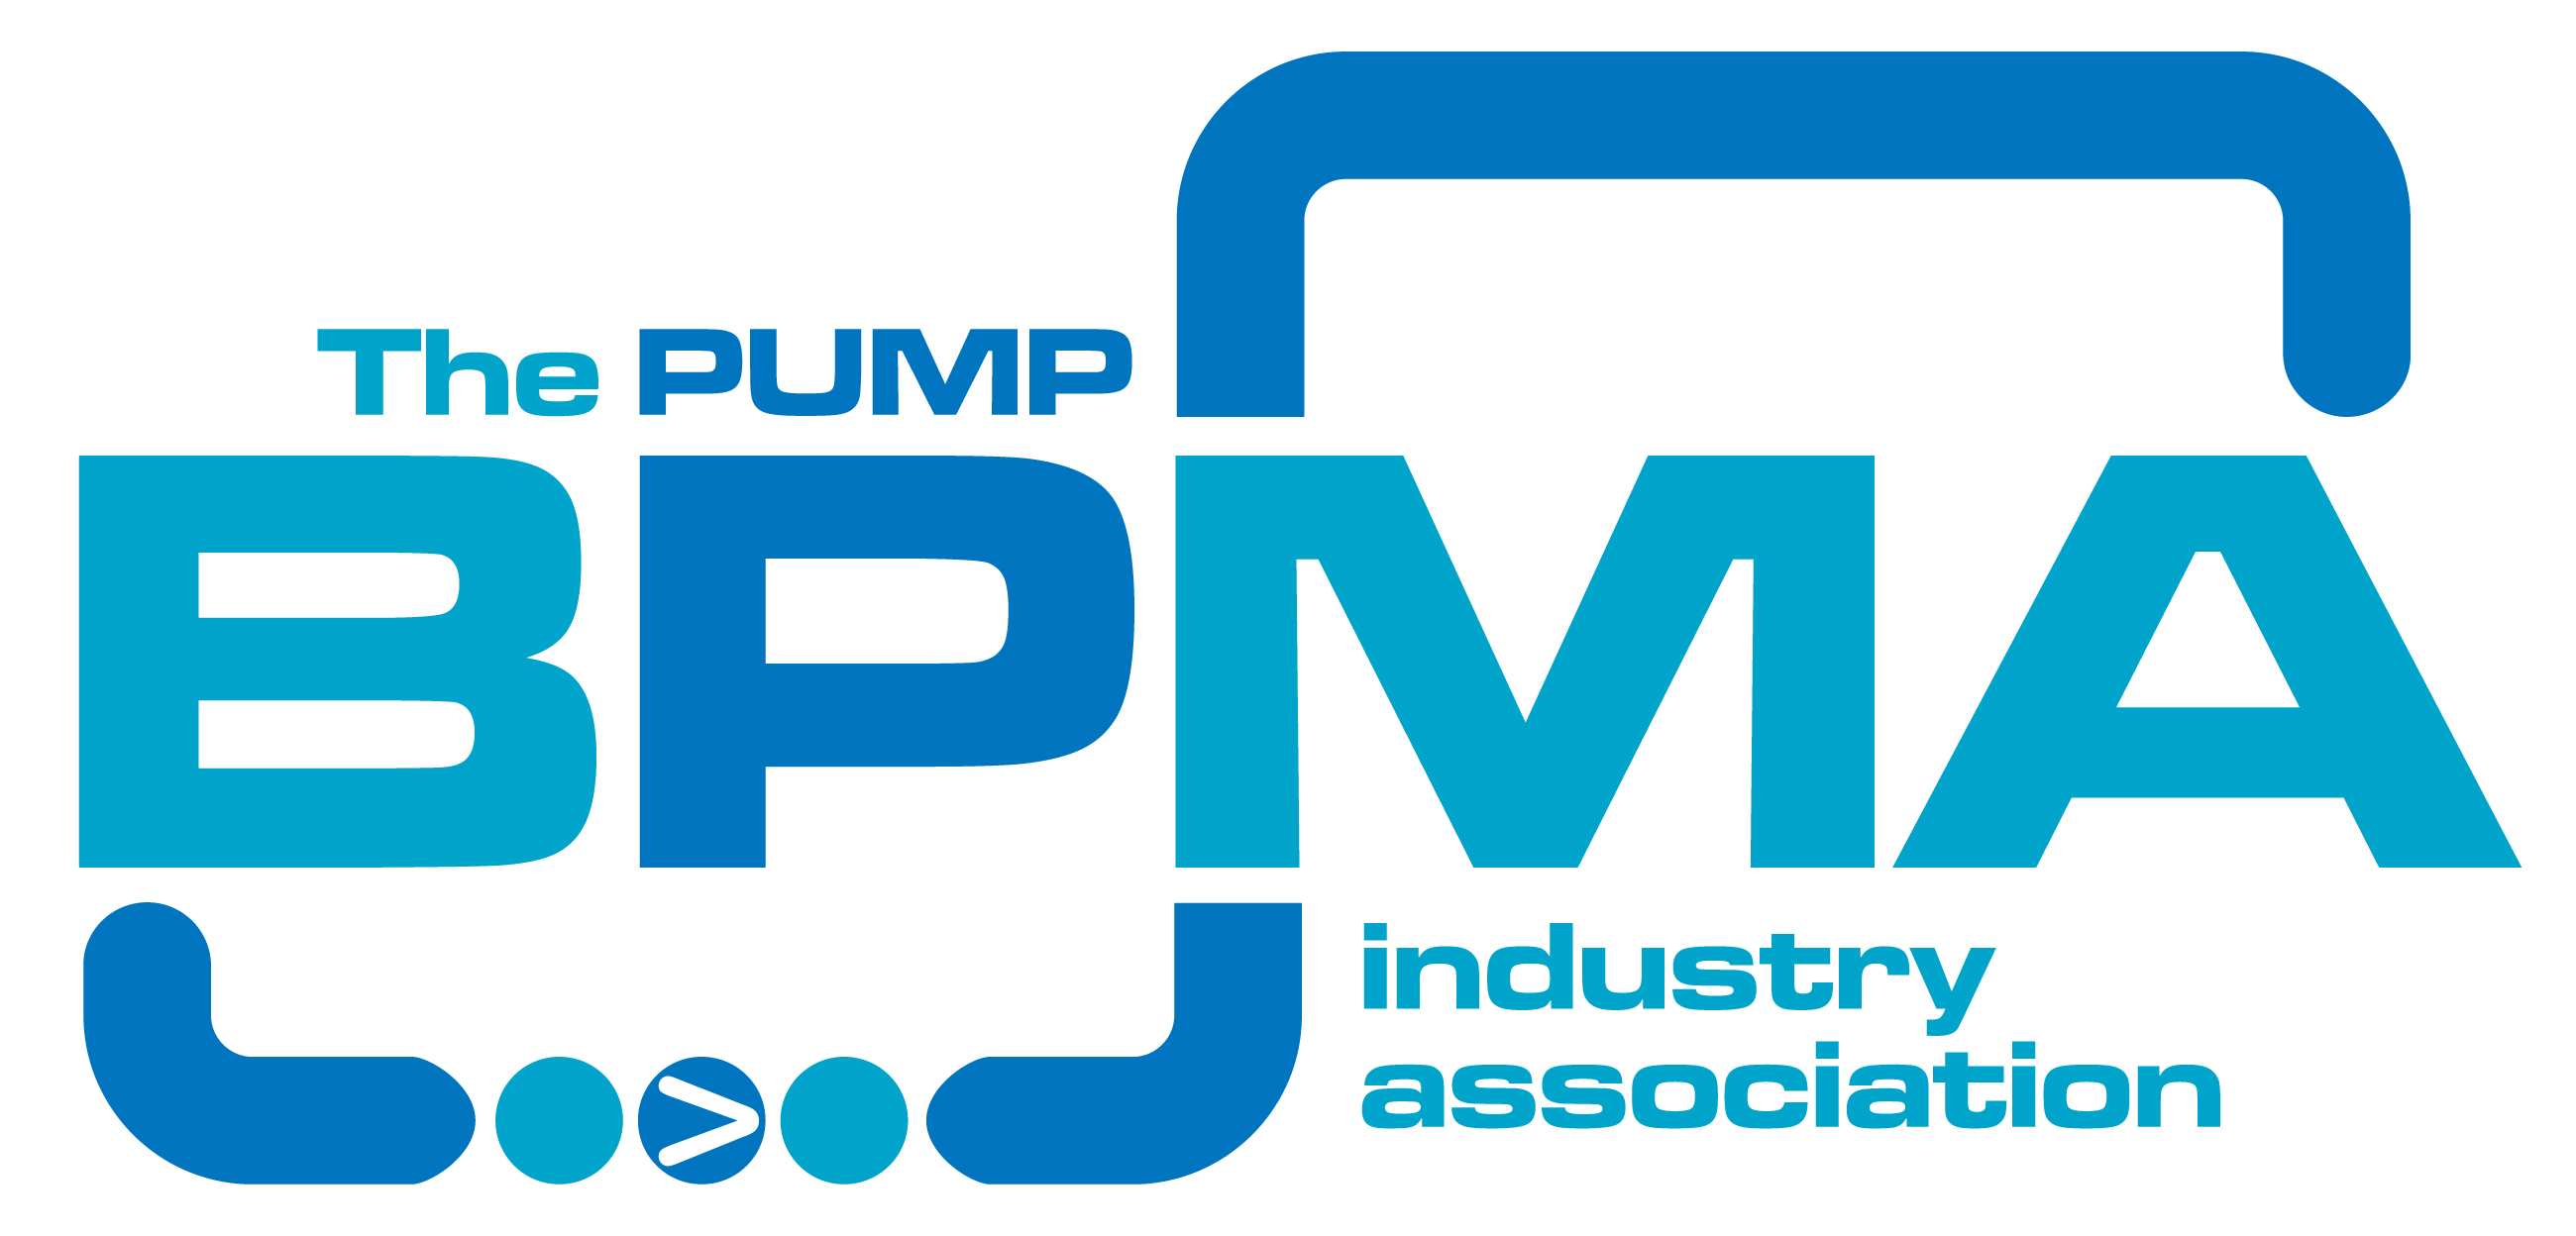 The BPMA's Introduction to Pumping Technology  E-learning training course has seen a substantial increase in enrolments since July 2020.